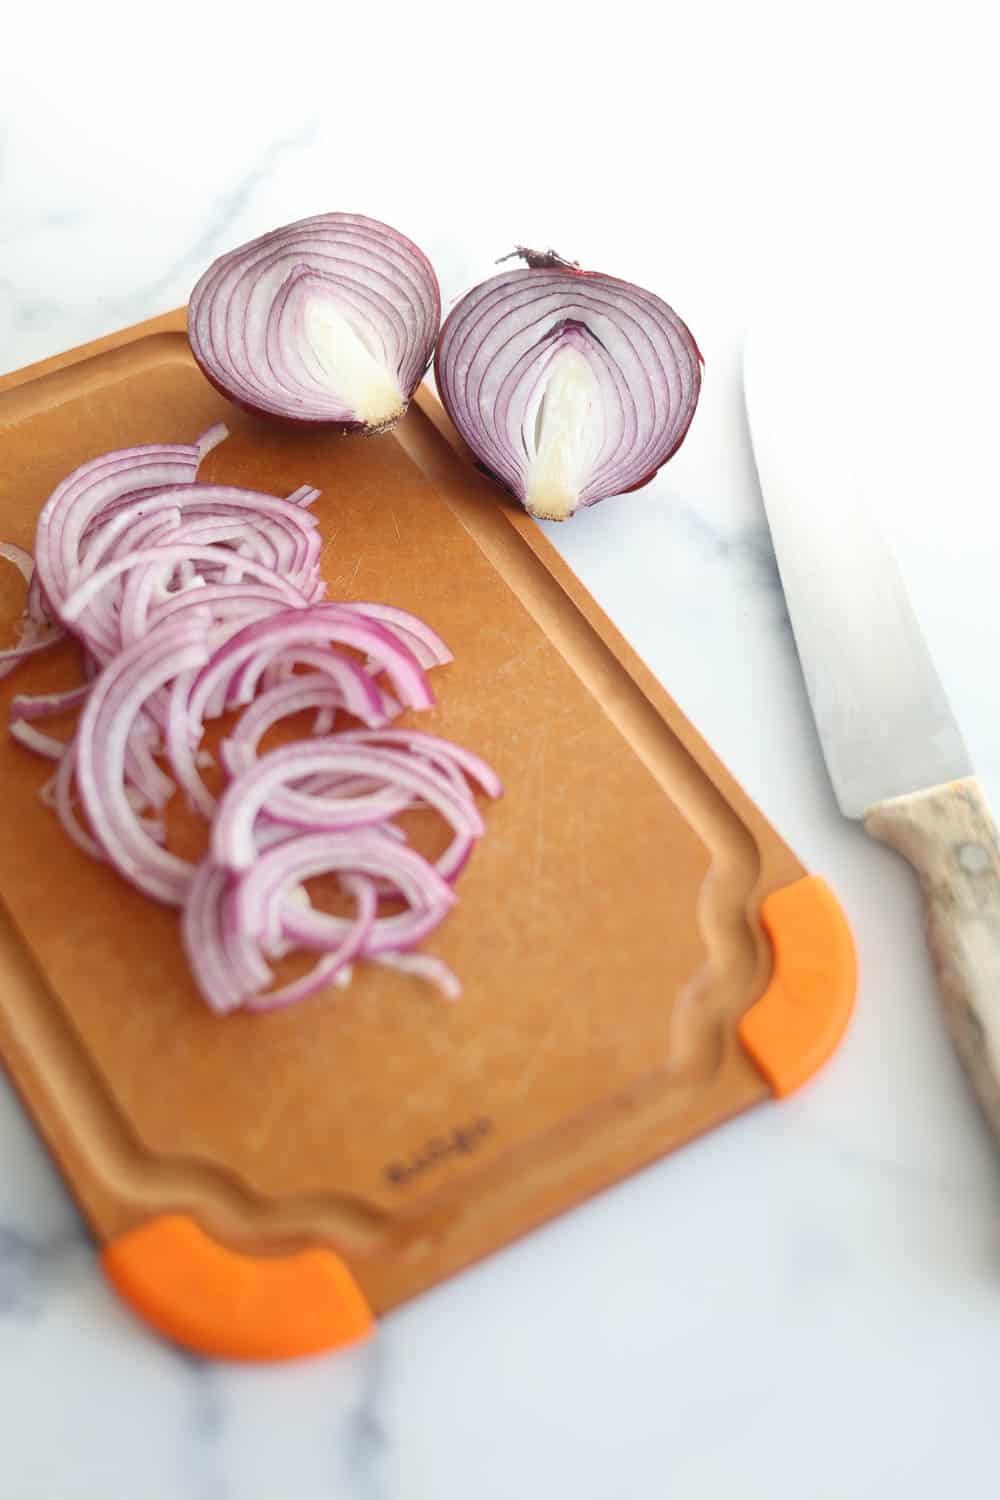 Thinly sliced red onions on a cutting board.